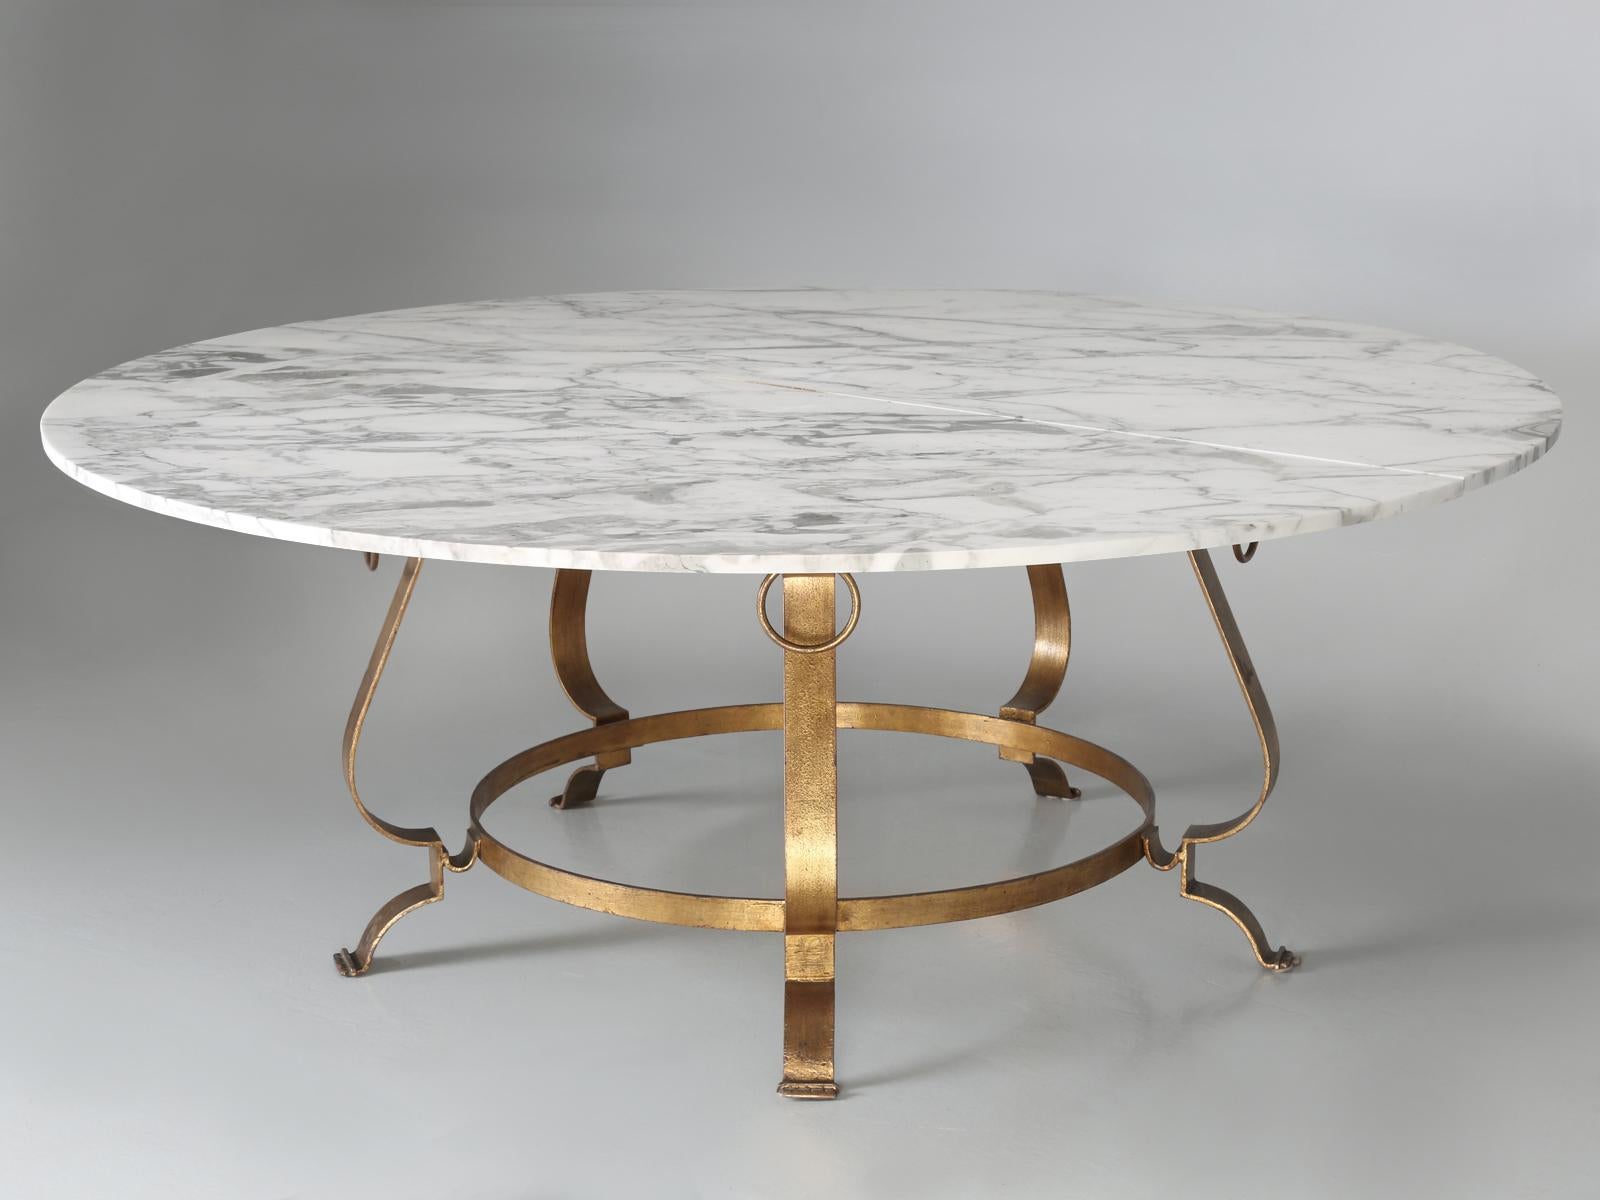 Vintage French Mid-Century Modern dining room table, with a spectacular honed Arabescato Carrara marble top imported from Italy. The table base is still in its original gilt finish and the marble has not been repaired and remains crack-free. The